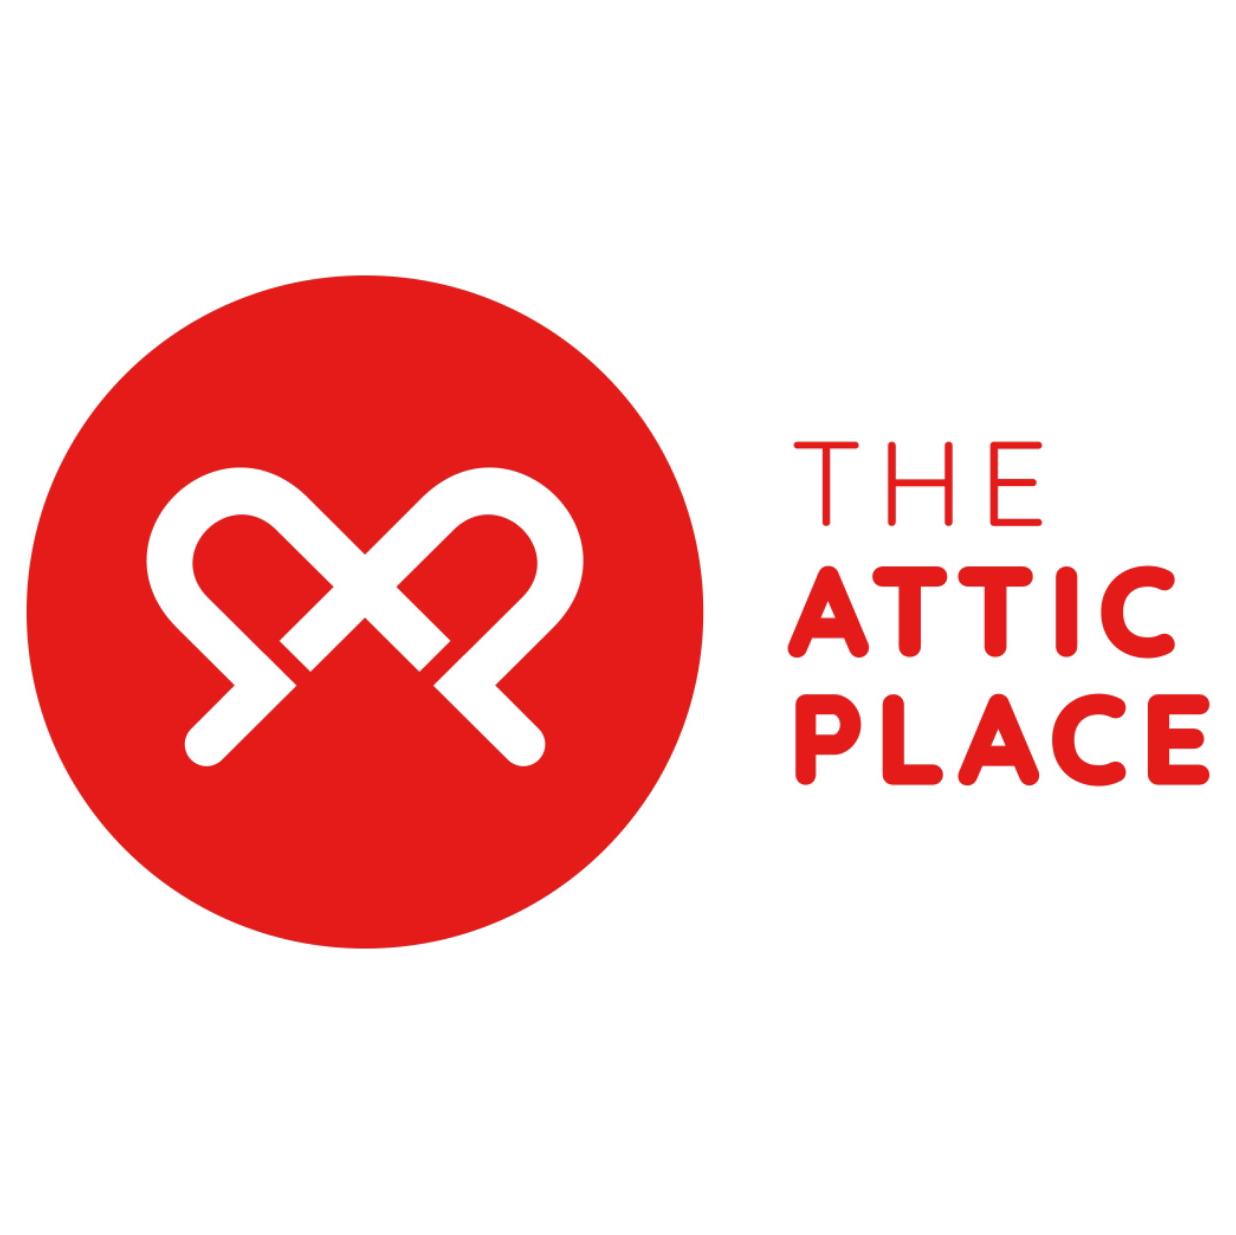 The Attic Place's images